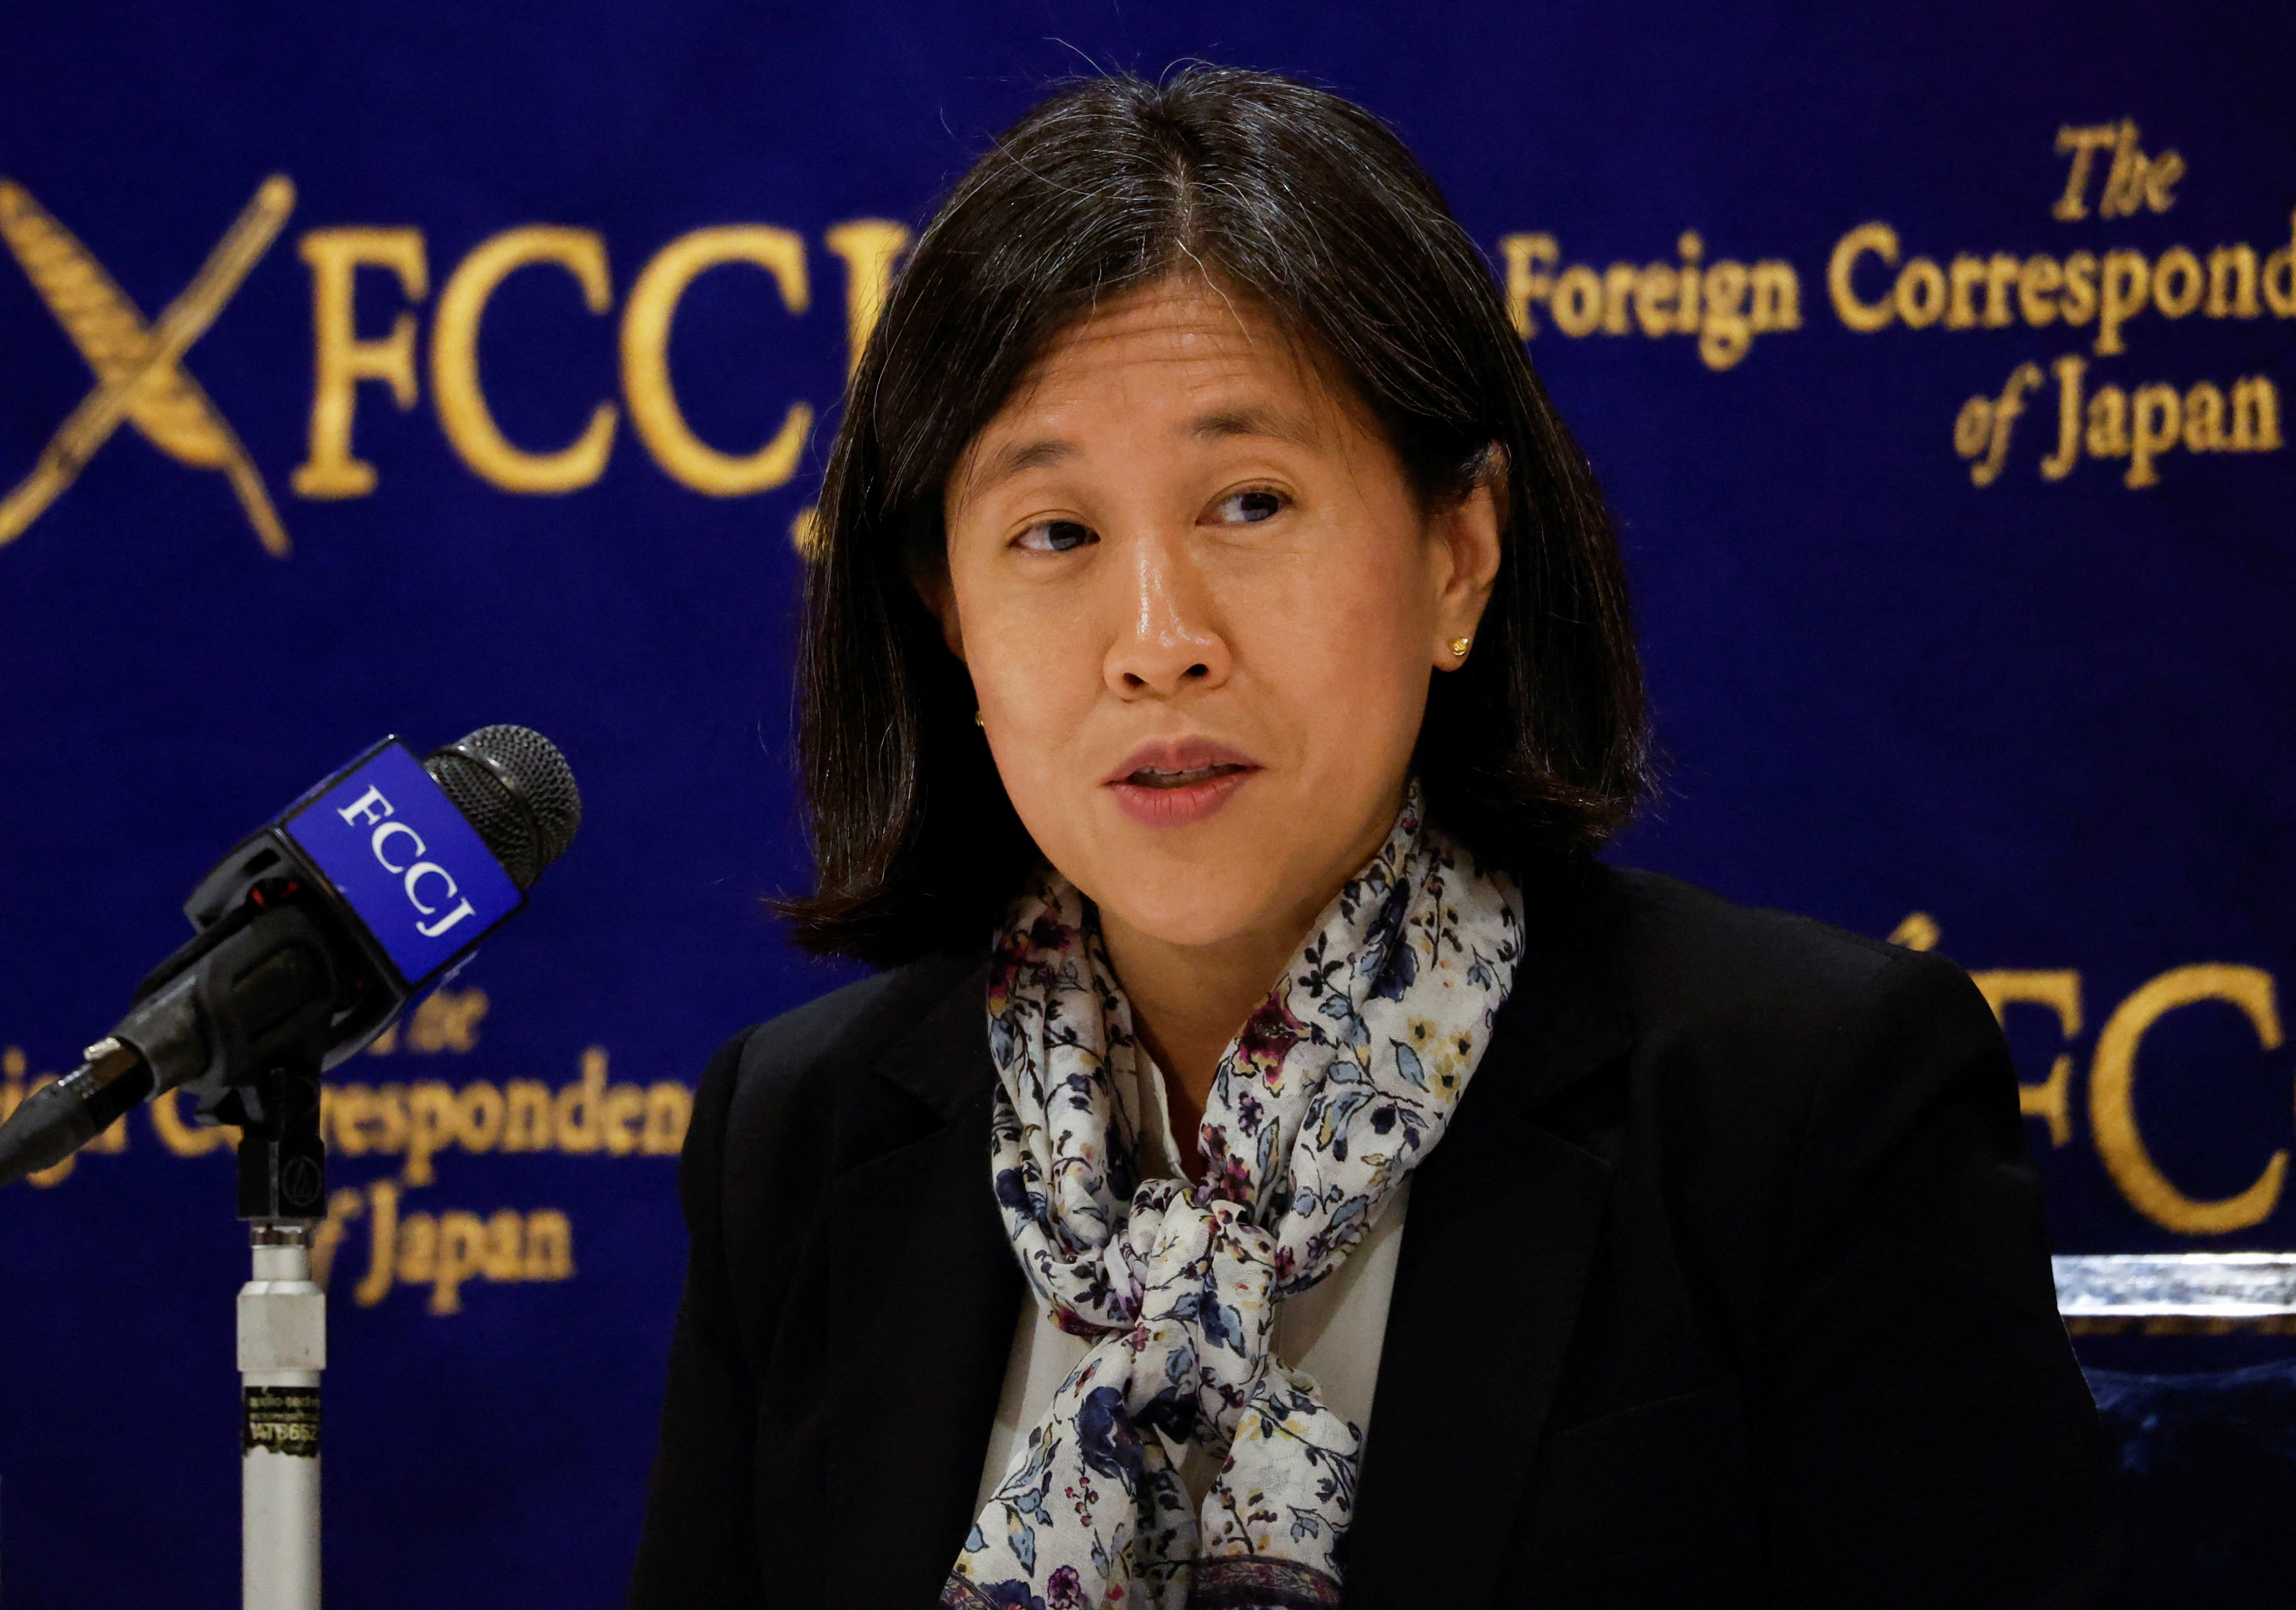 U.S. Trade Representative Katherine Tai attends a news conference at Foreign Correspondents' Club of Japan in Tokyo